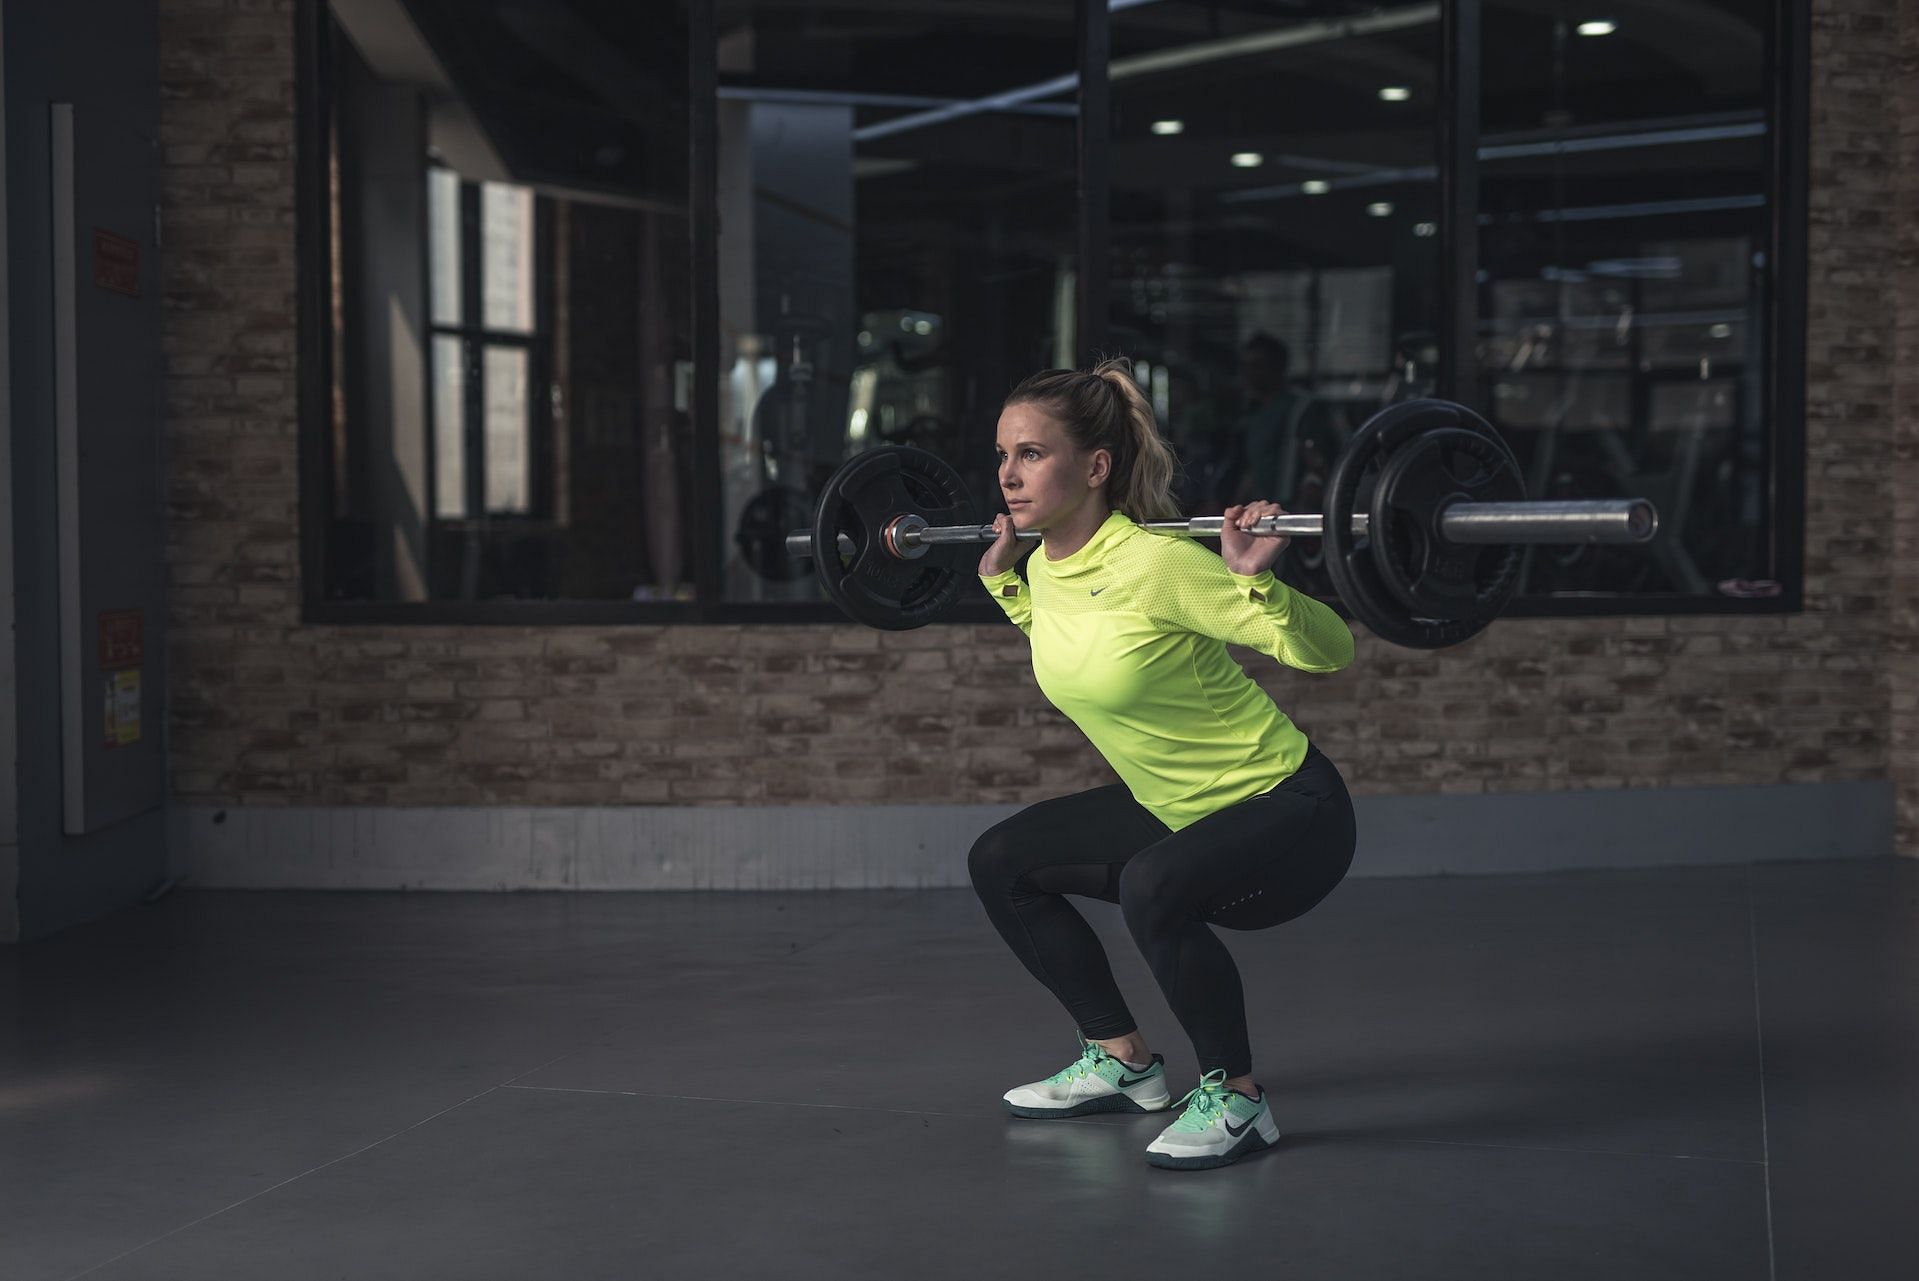 Barbell squats are the best compound lower body exercises. (Photo via Pexels/Li Sun)